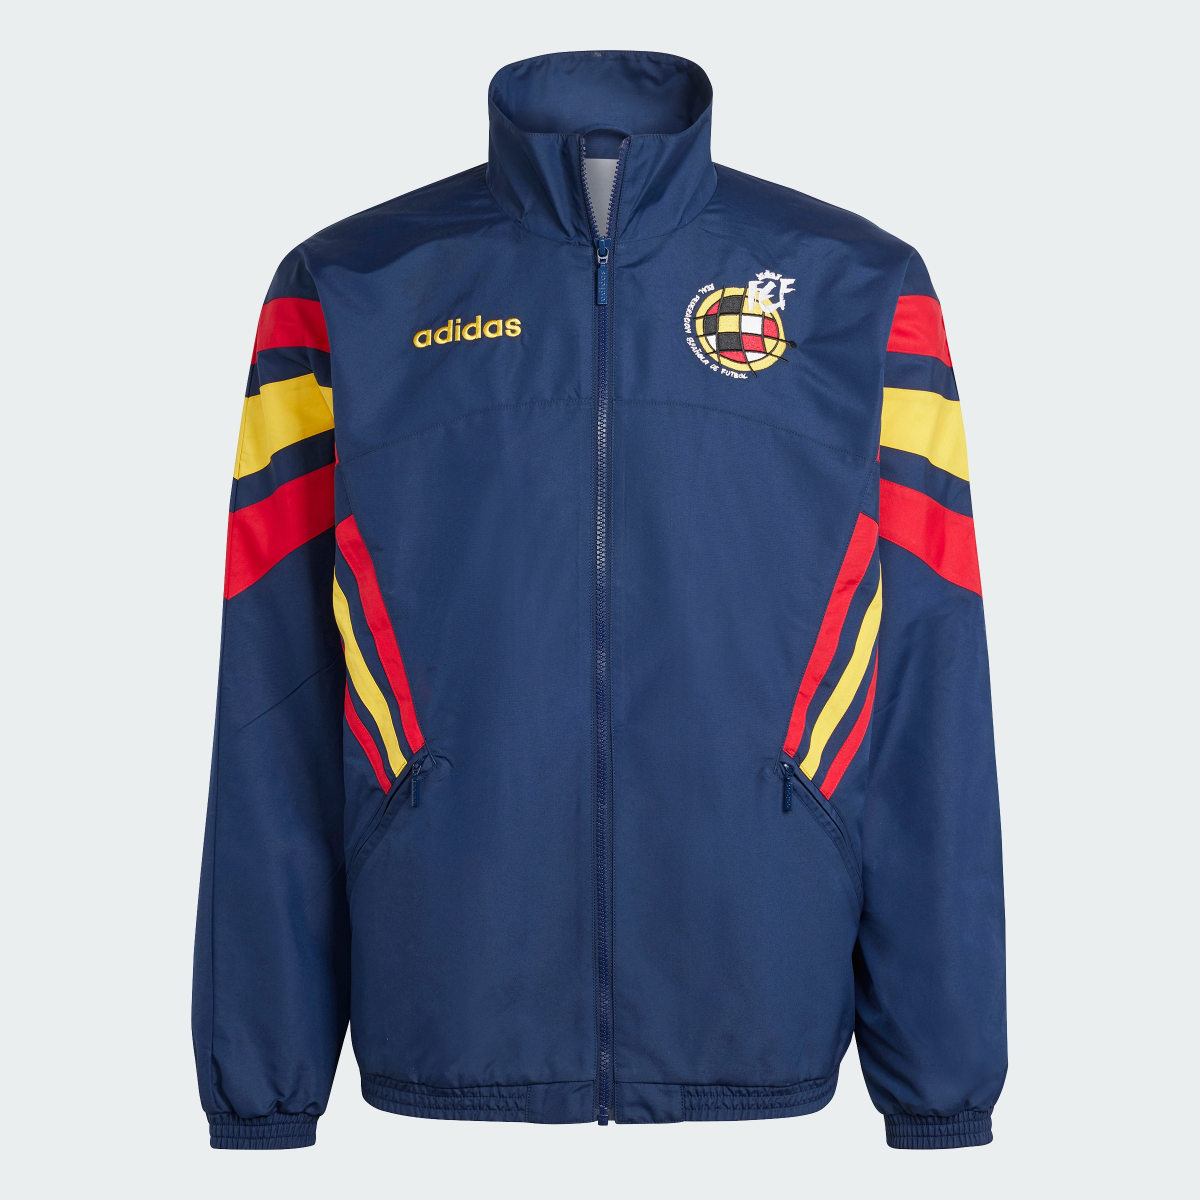 Adidas Spain 1996 Woven Track Top. 5